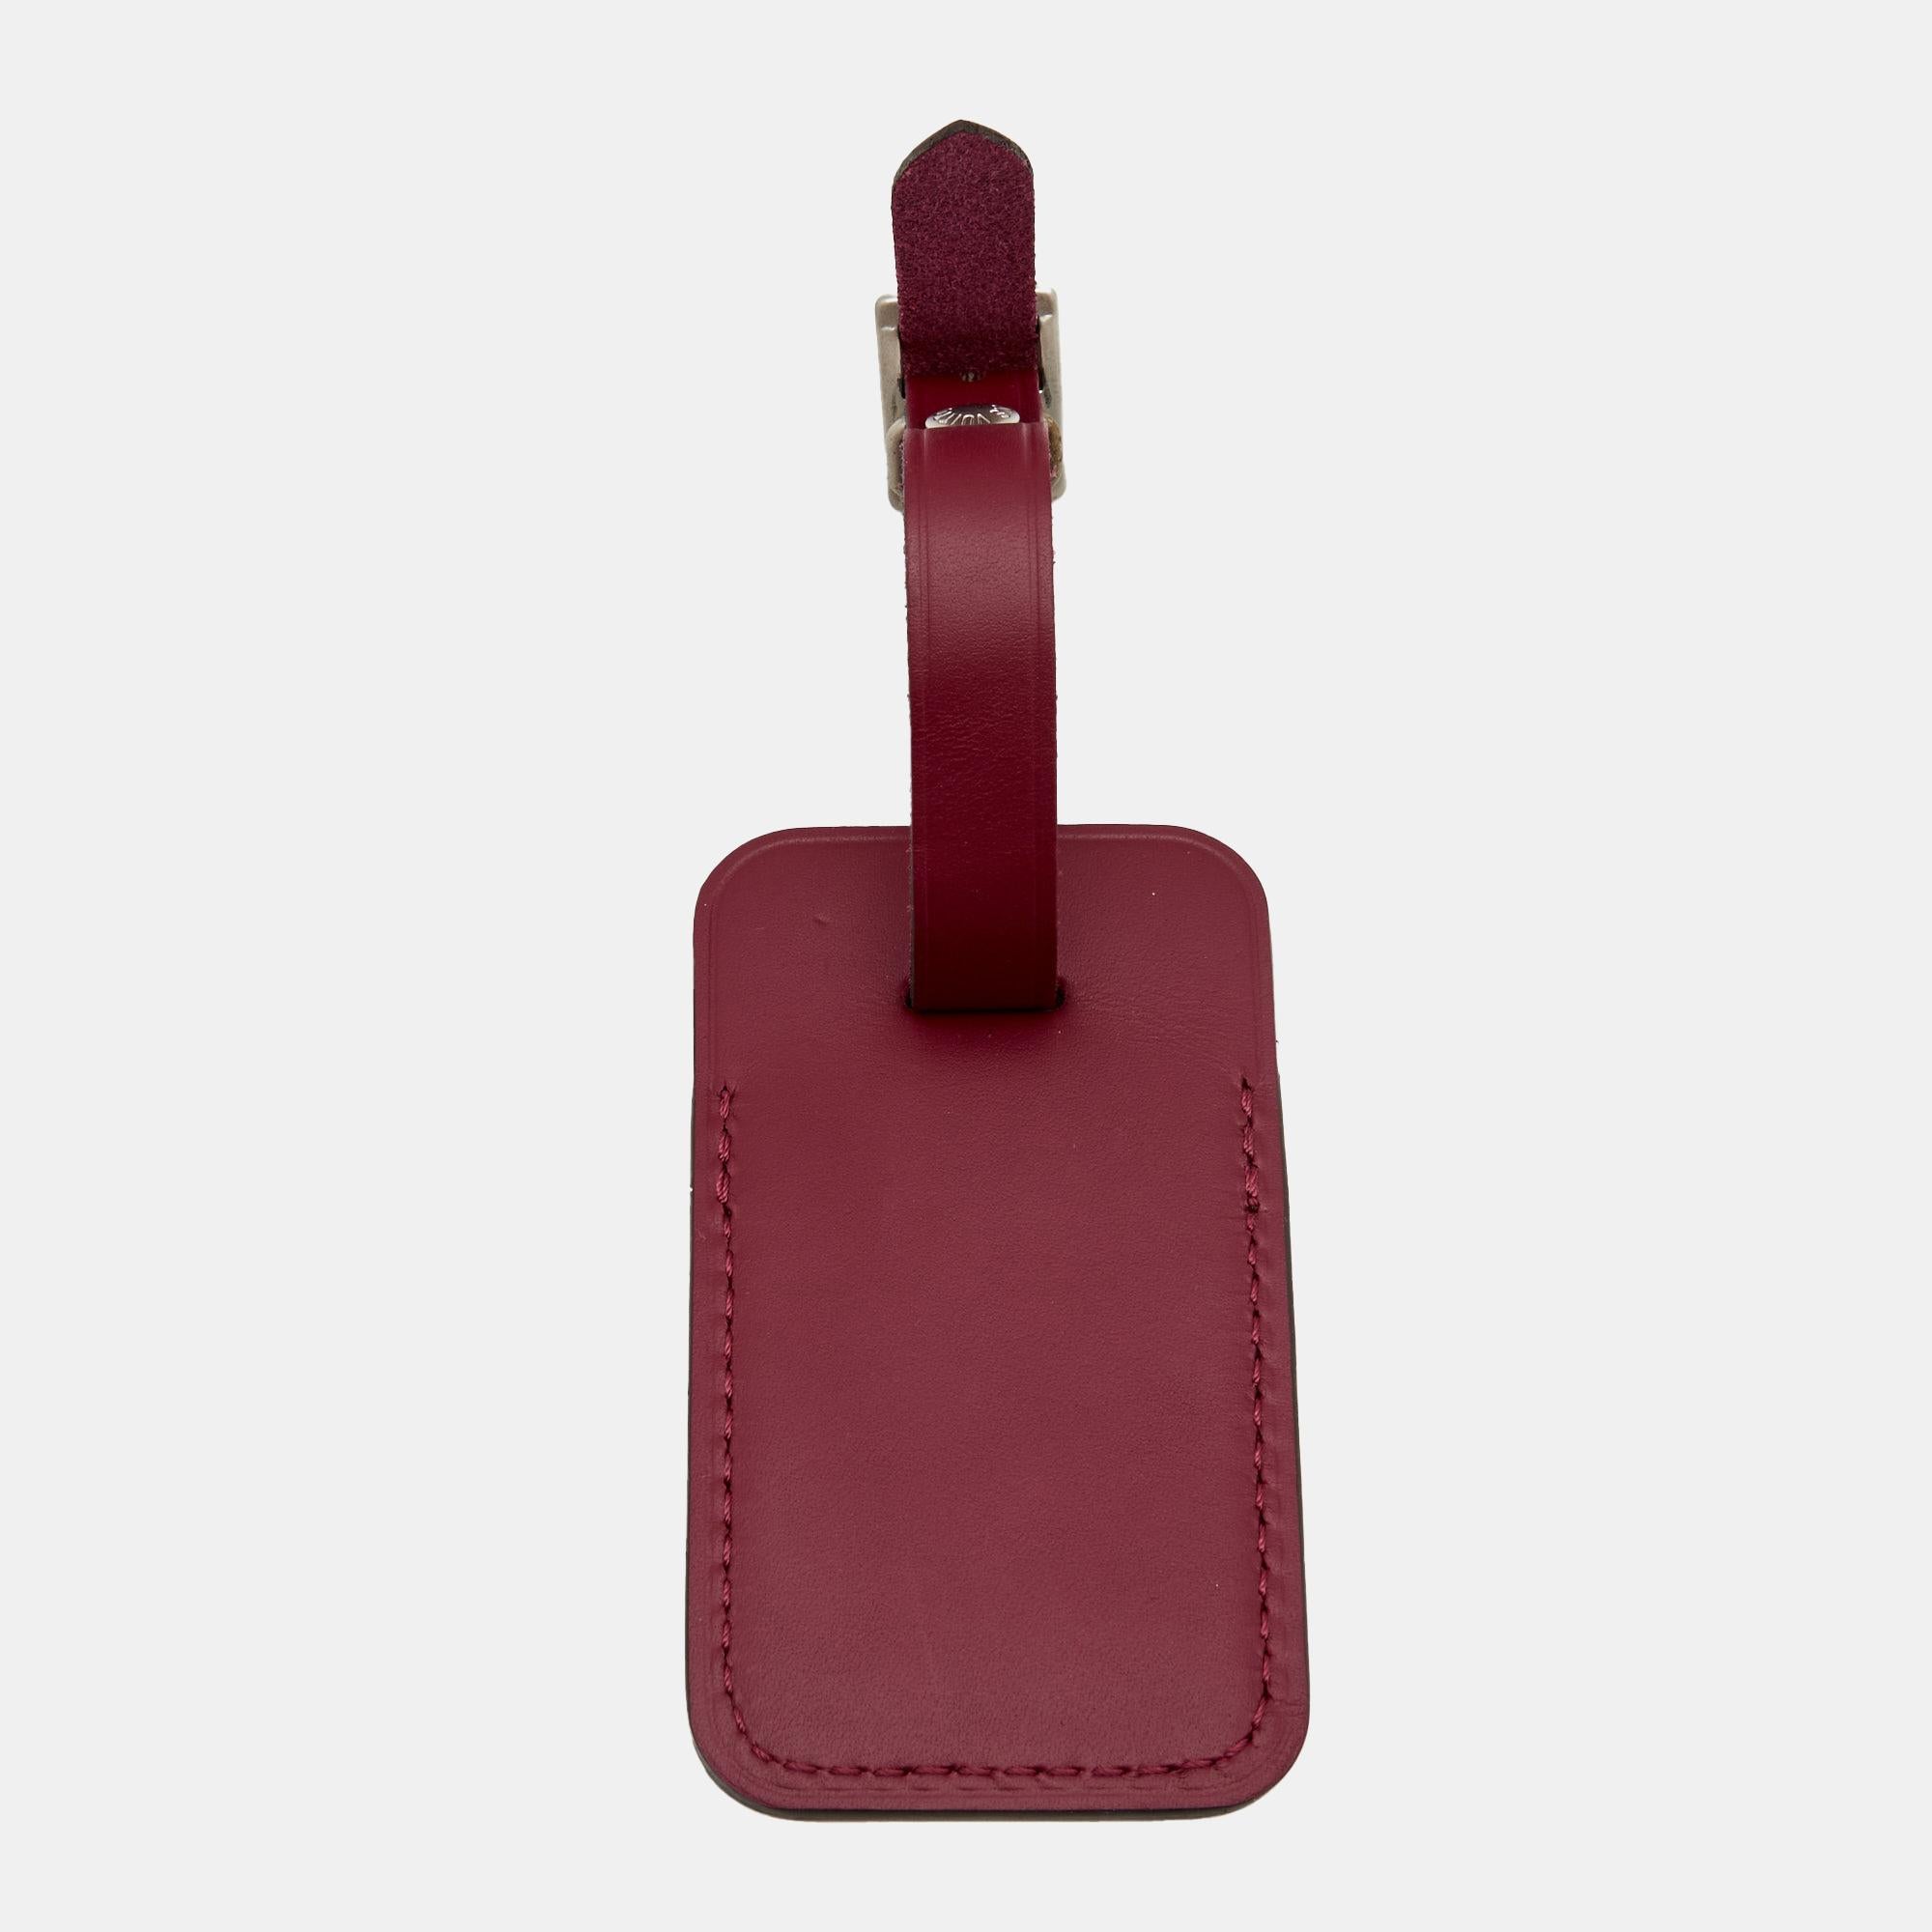 Make your luggage easy to spot and identify (while also looking uber-chic, of course!) thanks to Louis Vuitton's luggage tag - rendered in a subtle burgundy hue. Crafted from leather, this accessory can easily be looped and adjusted onto your